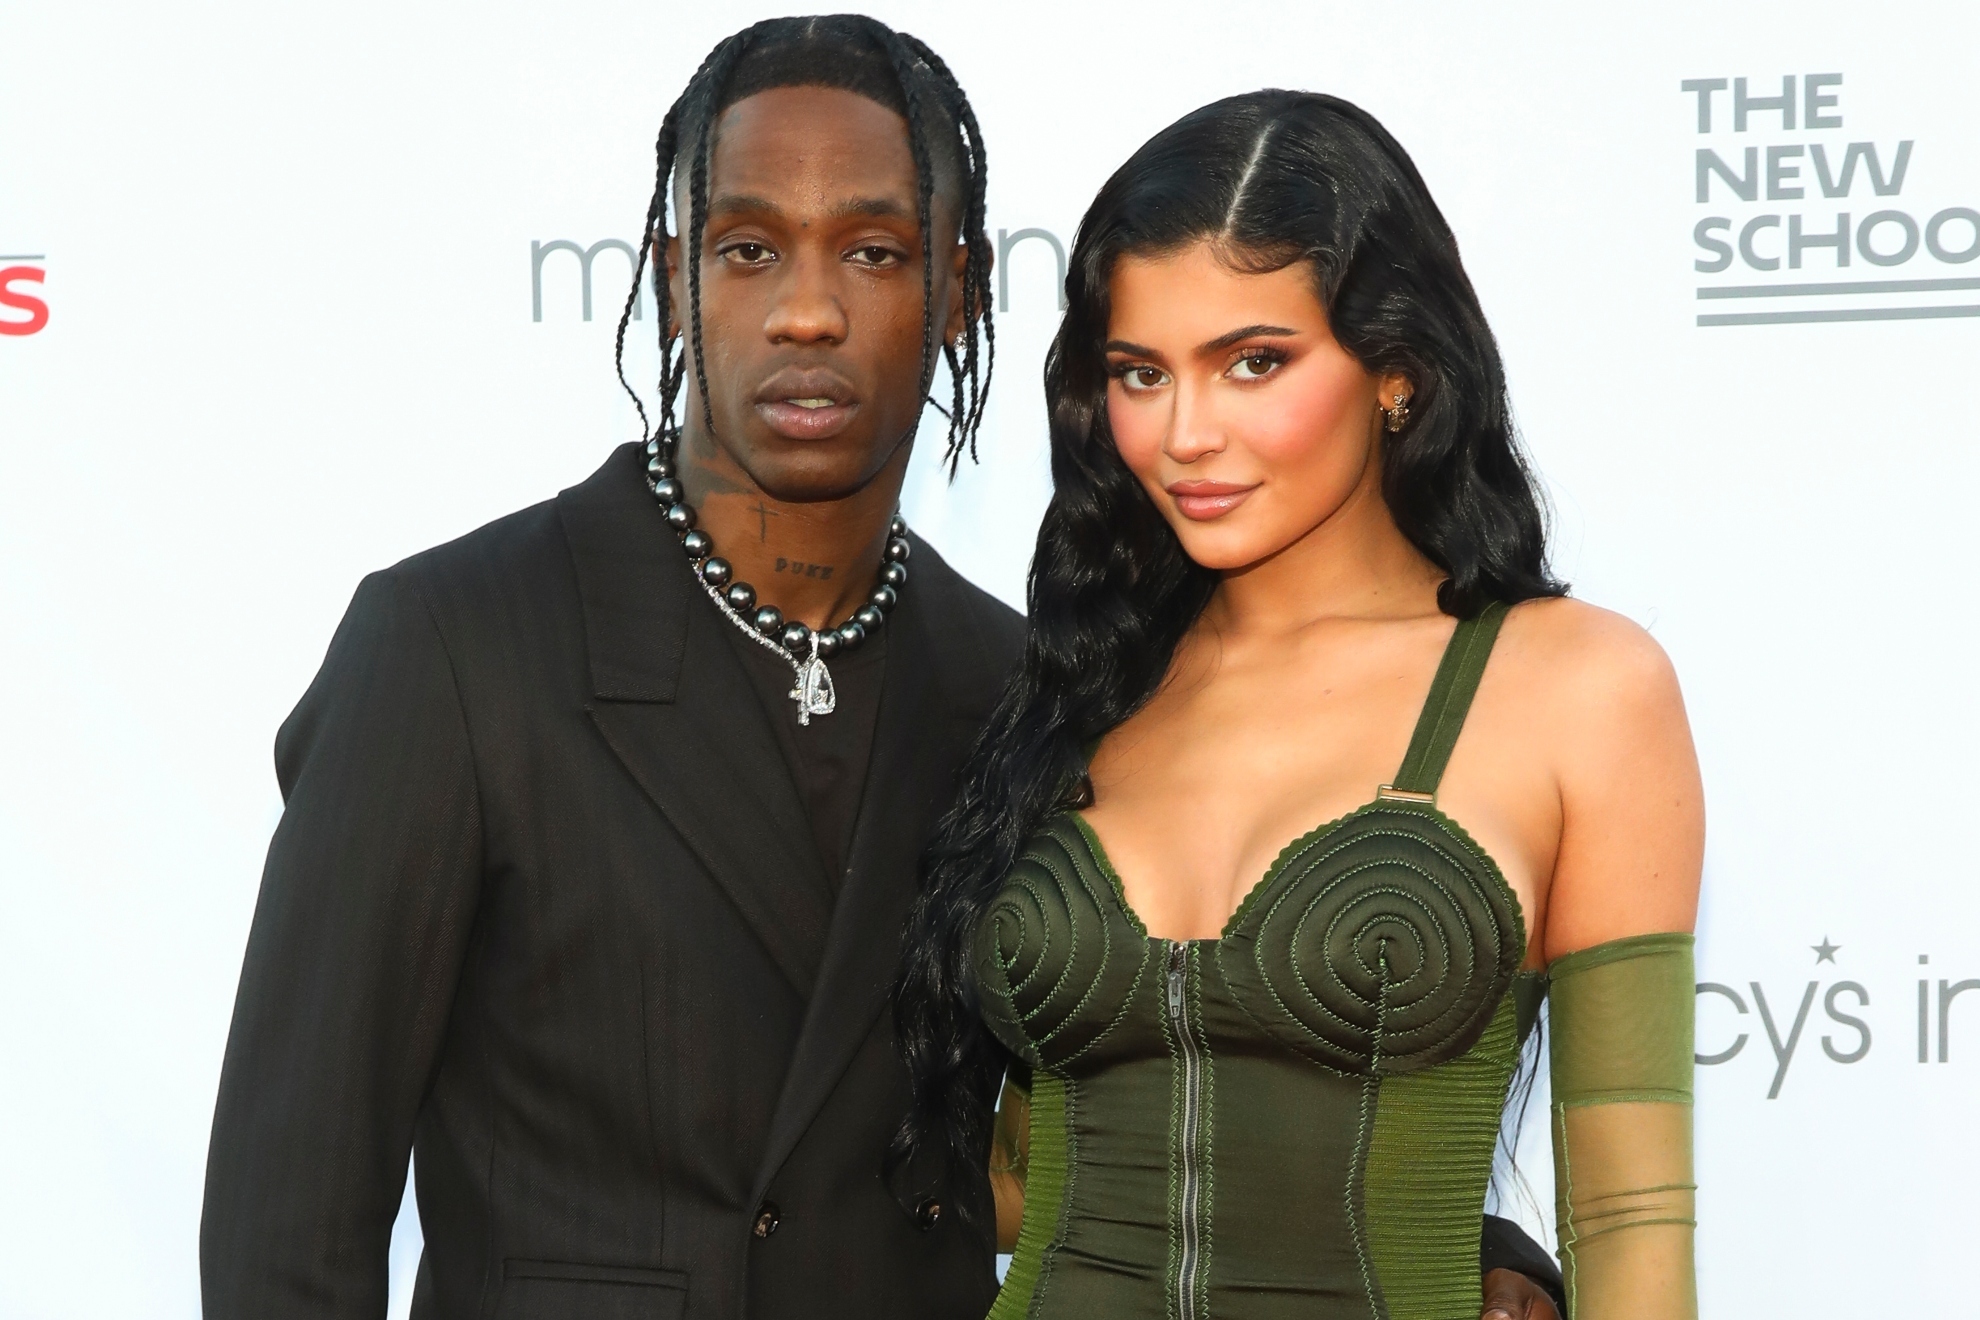 Image of Travis Scott and Kylie Jenner